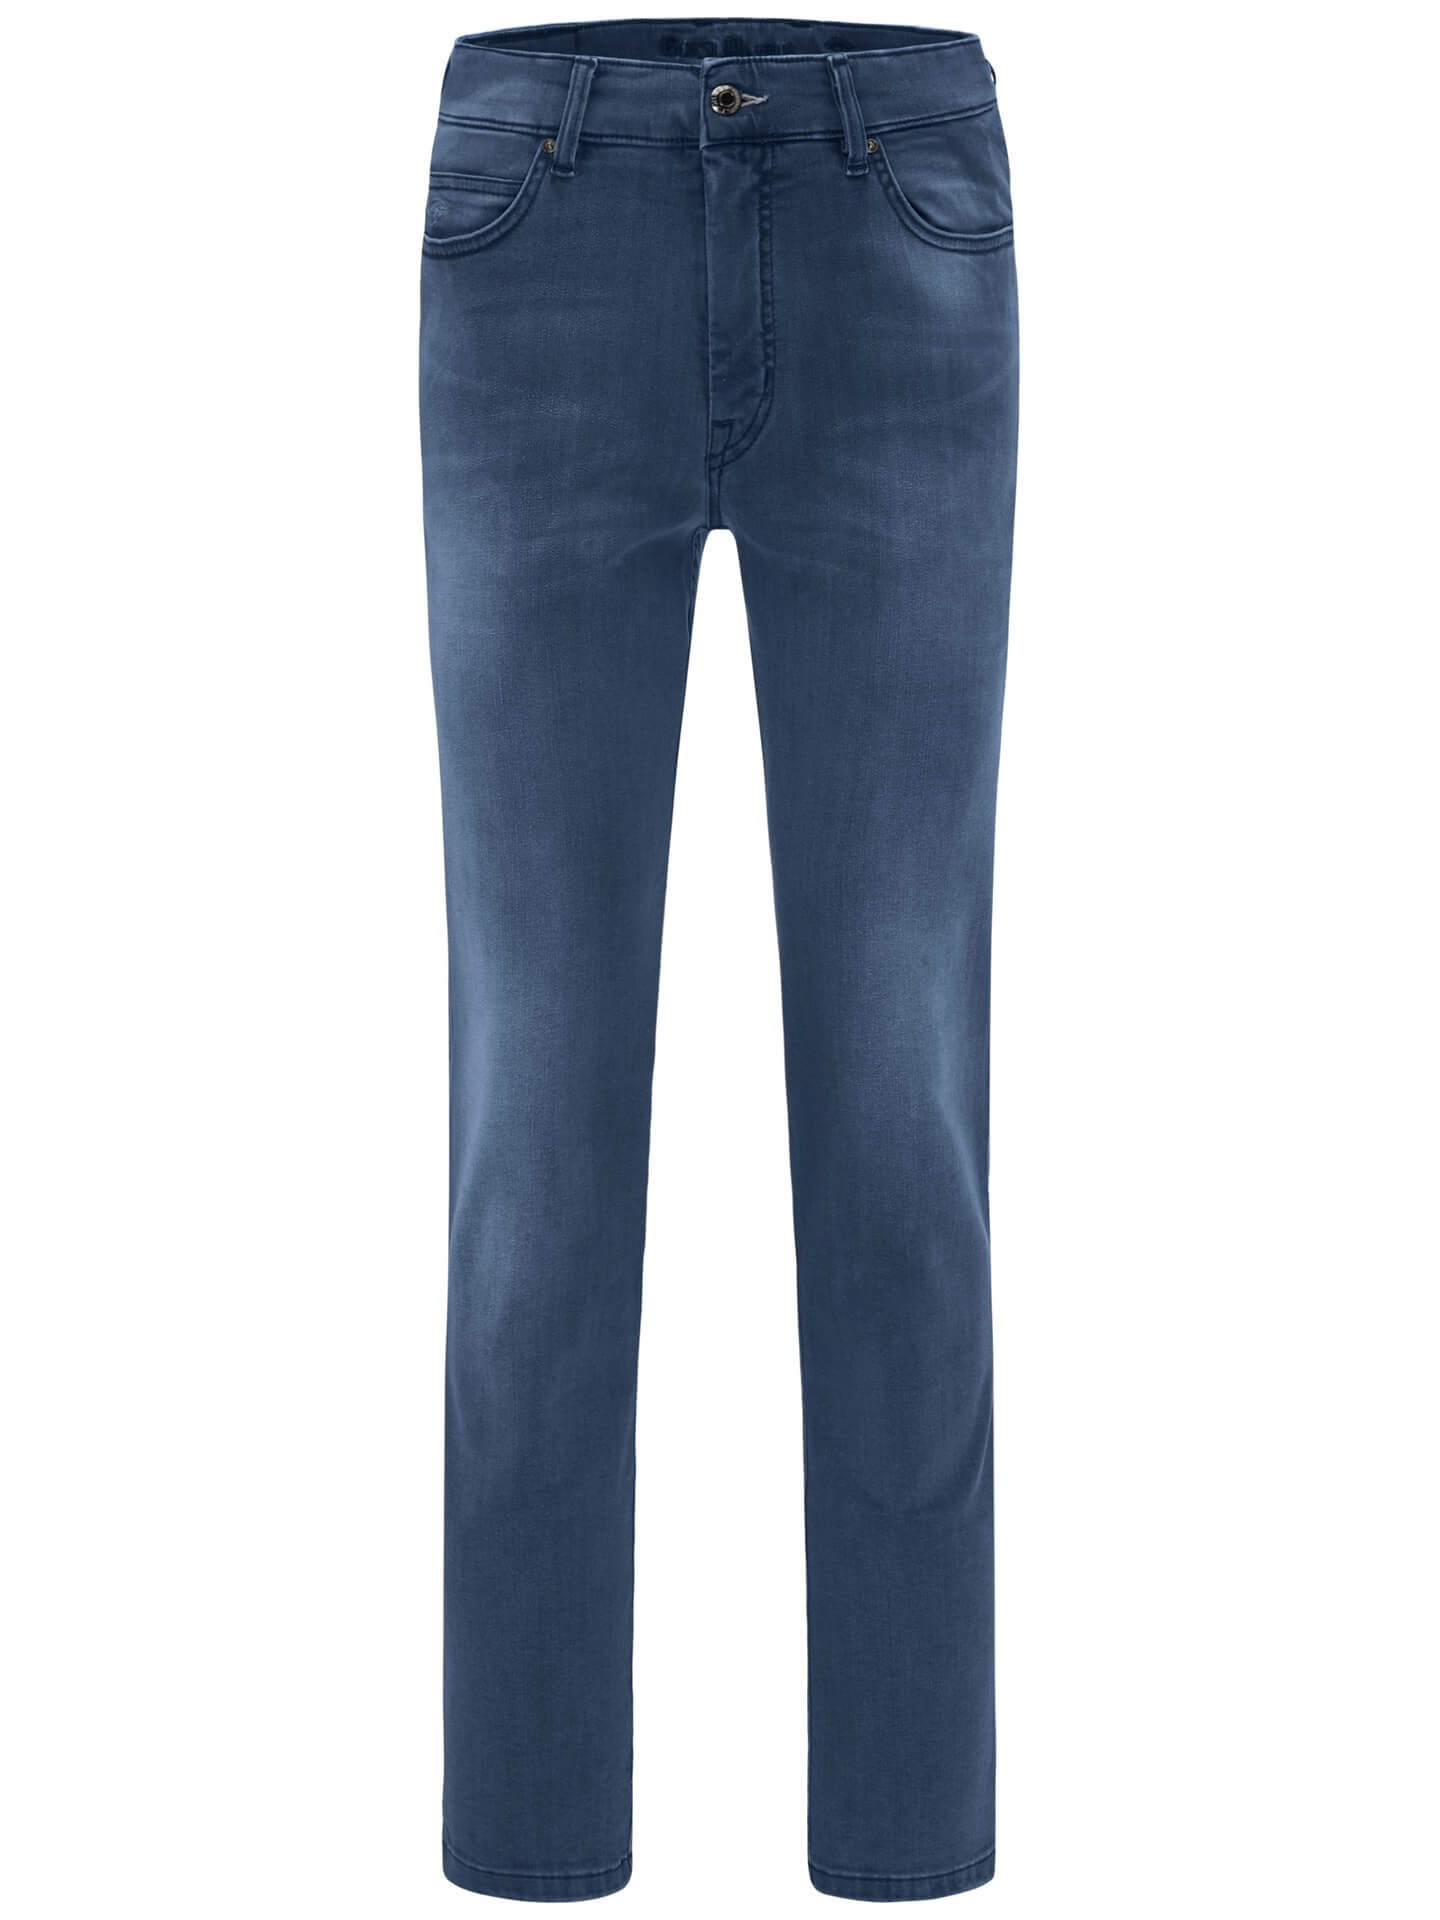 Fynch Hatton Mombasa Mid Blue Jeans | Davids Of Haslemere